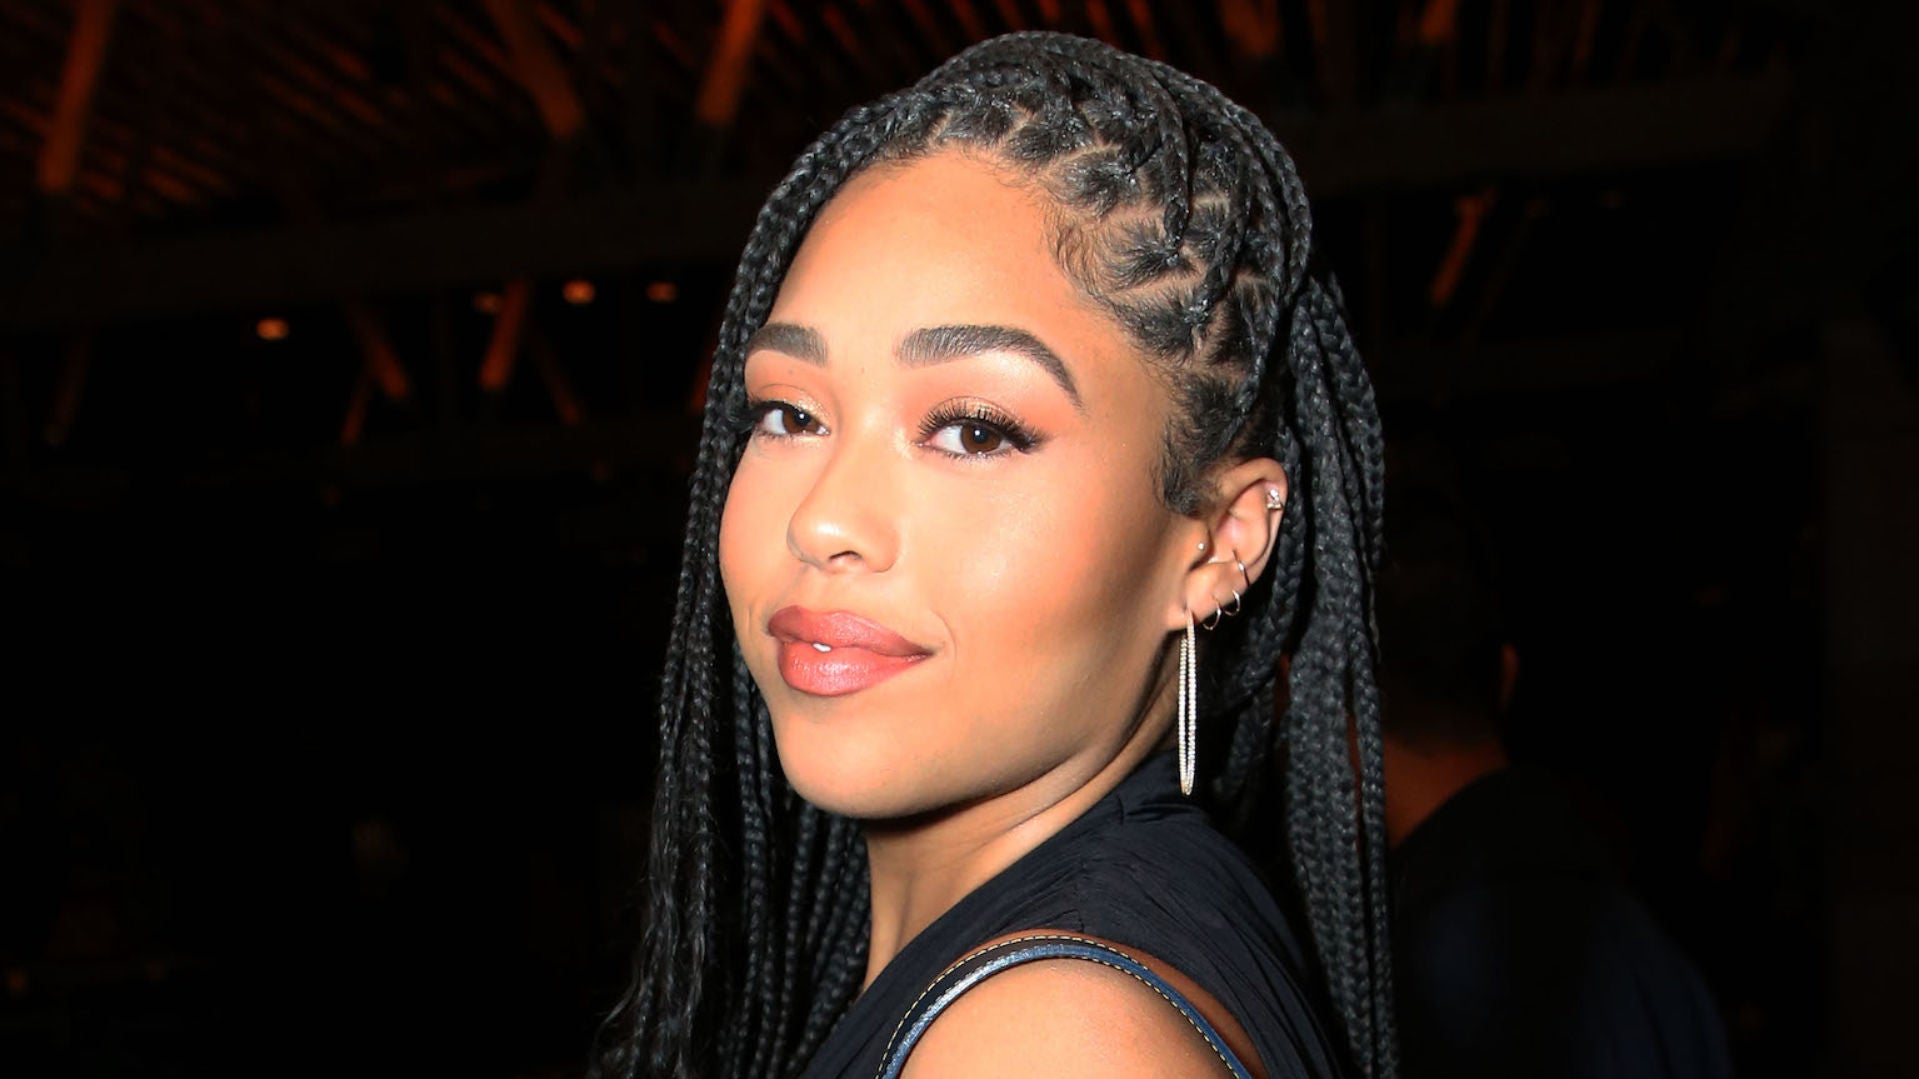 She’s Booked! Jordyn Woods To Make Acting Debut In ‘Grown-ish’